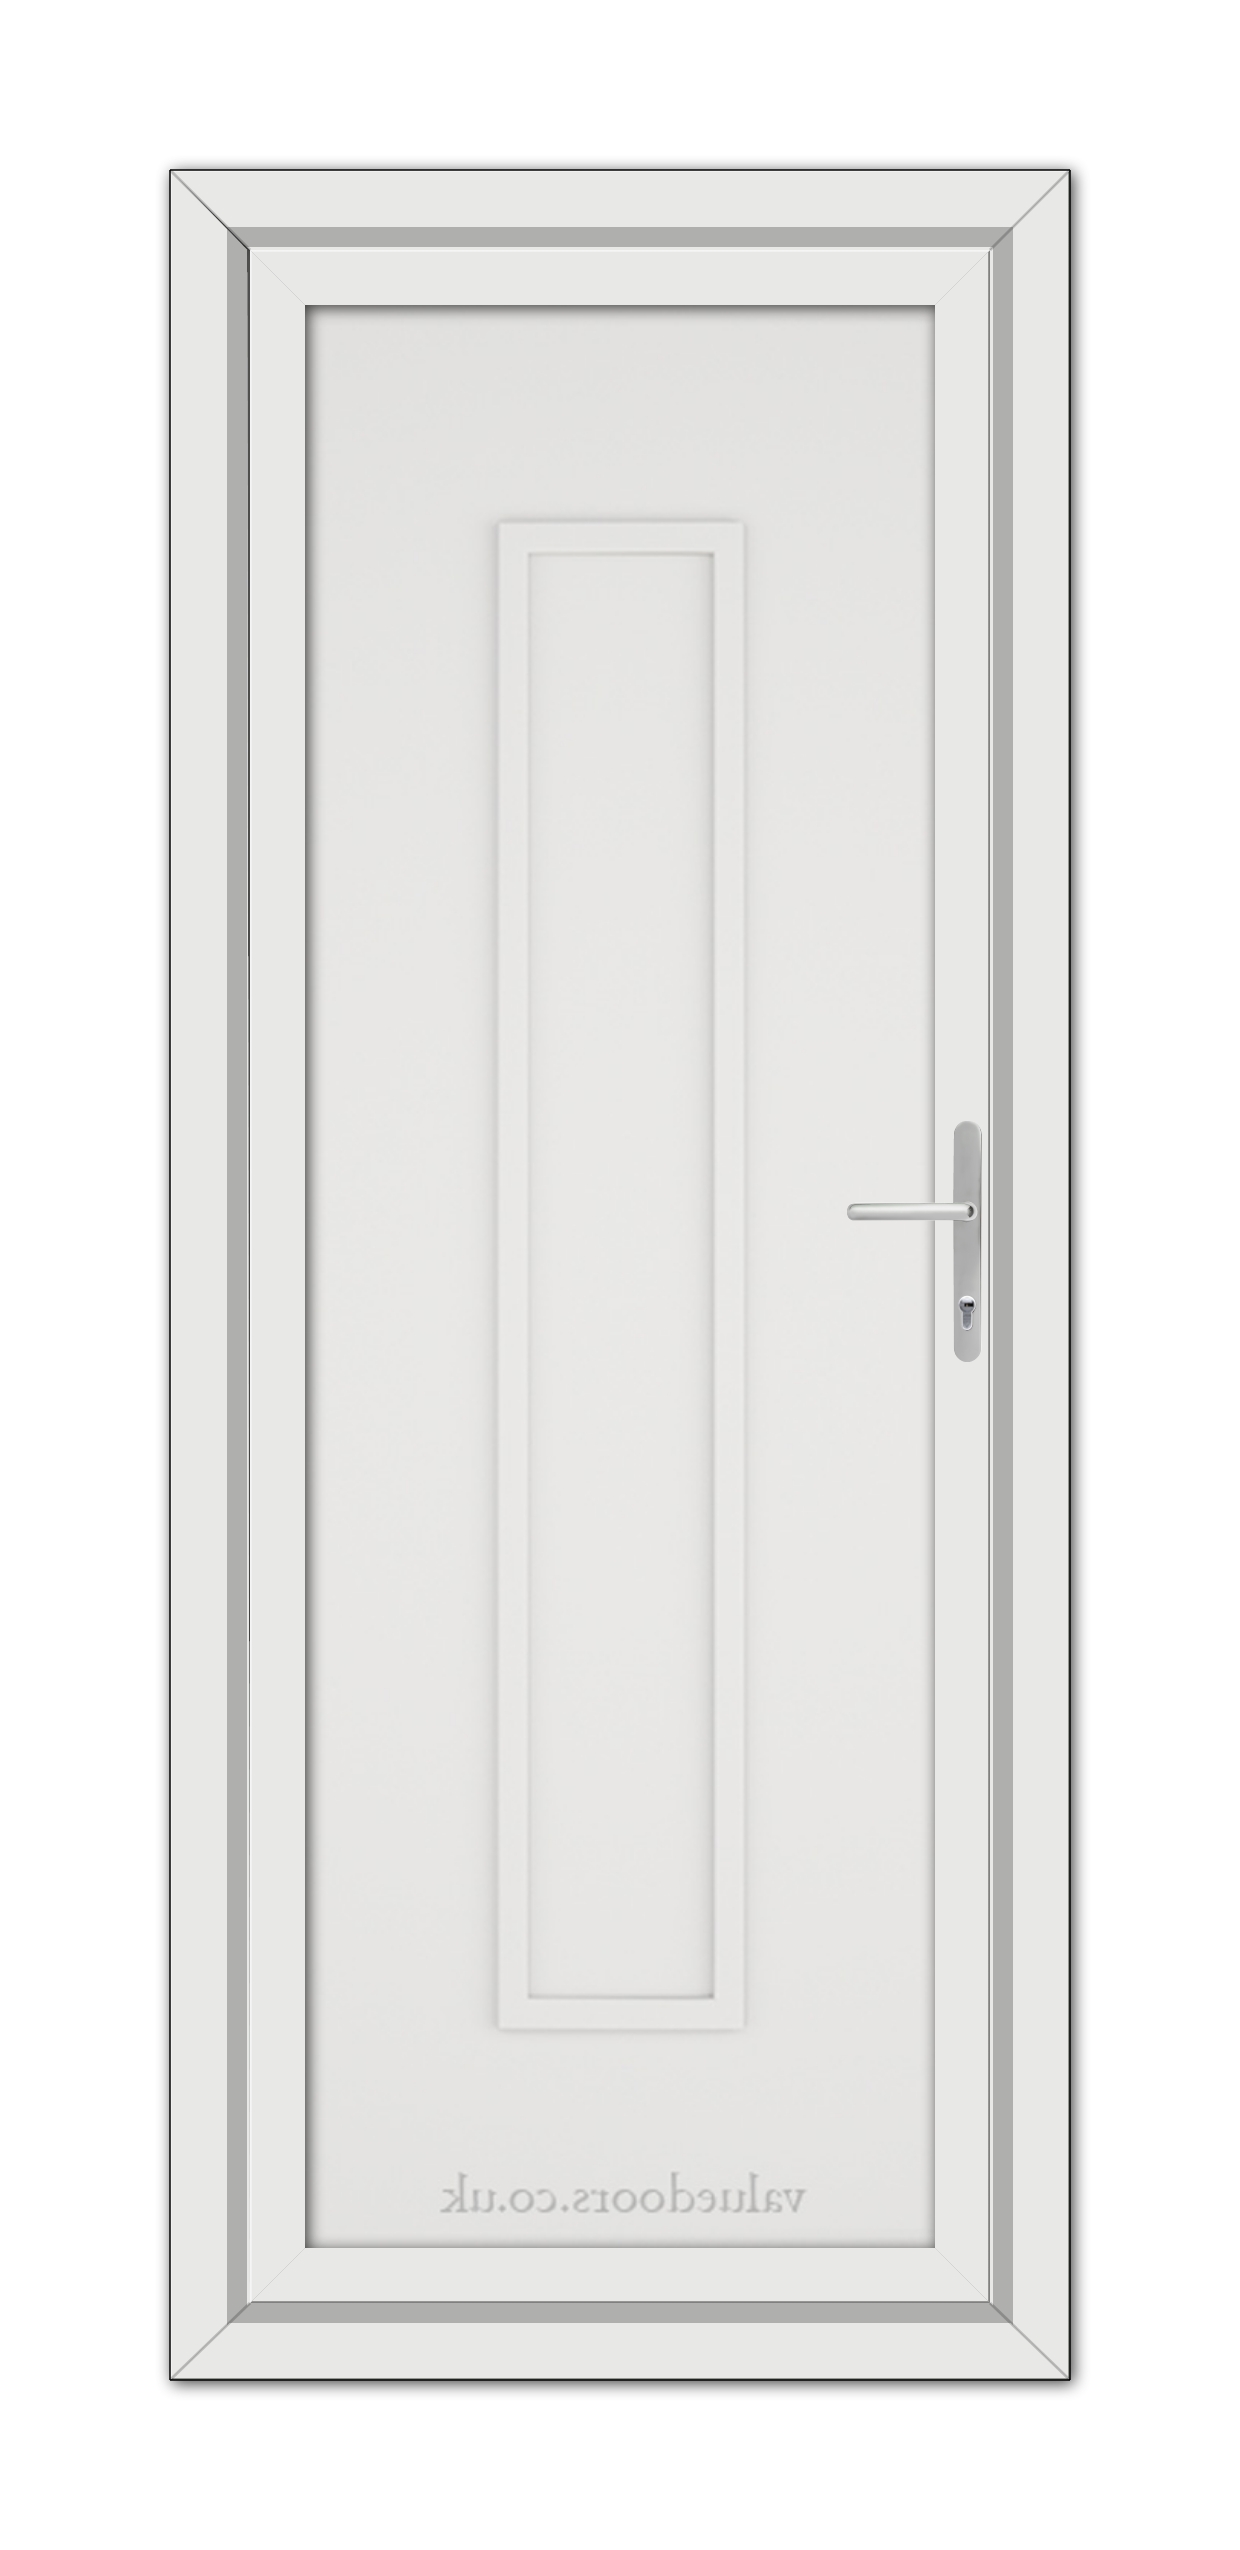 A White Modern 5101 Solid uPVC Door with a vertical rectangular glass panel and a metallic handle, viewed from the front.